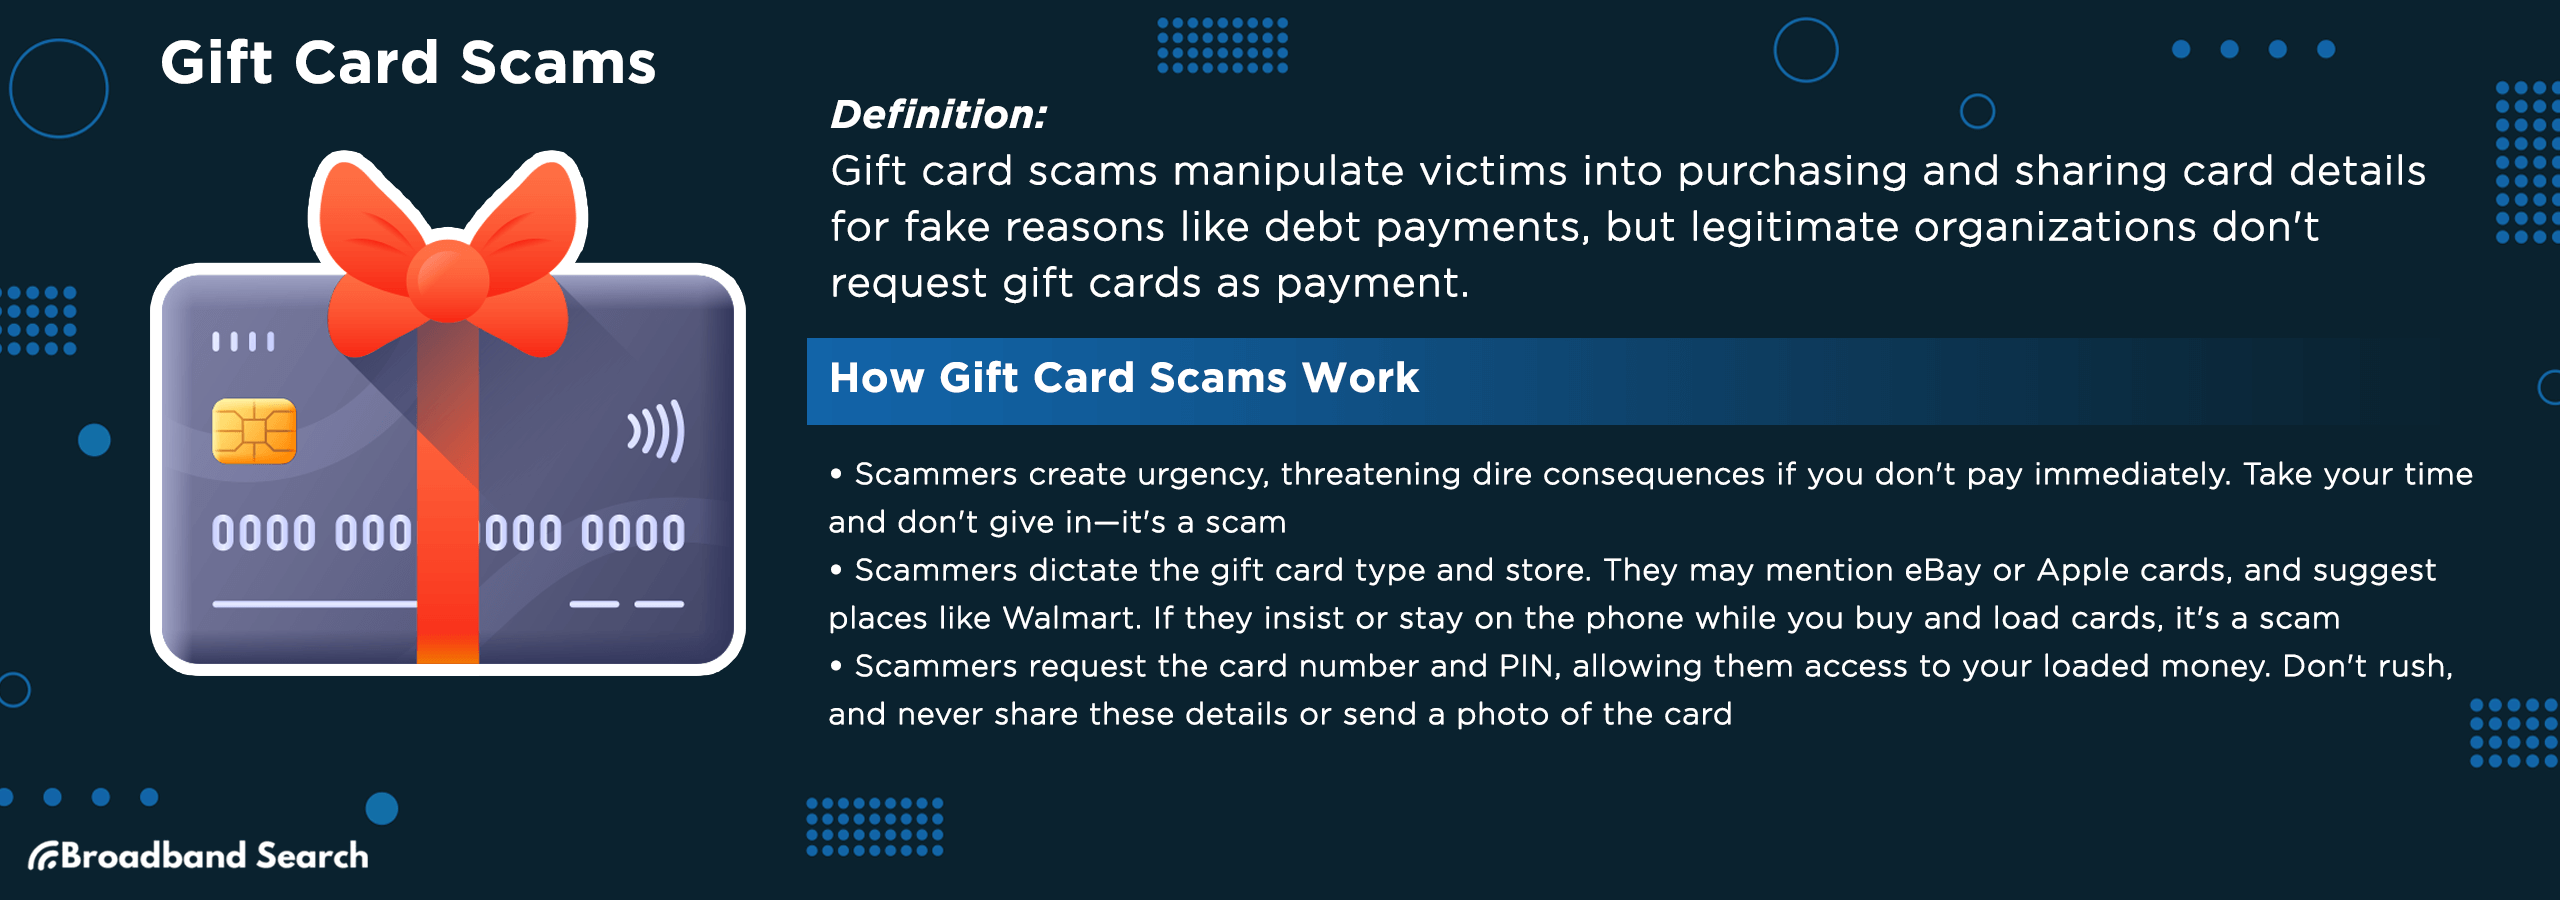 Definition and signs of gift card scams